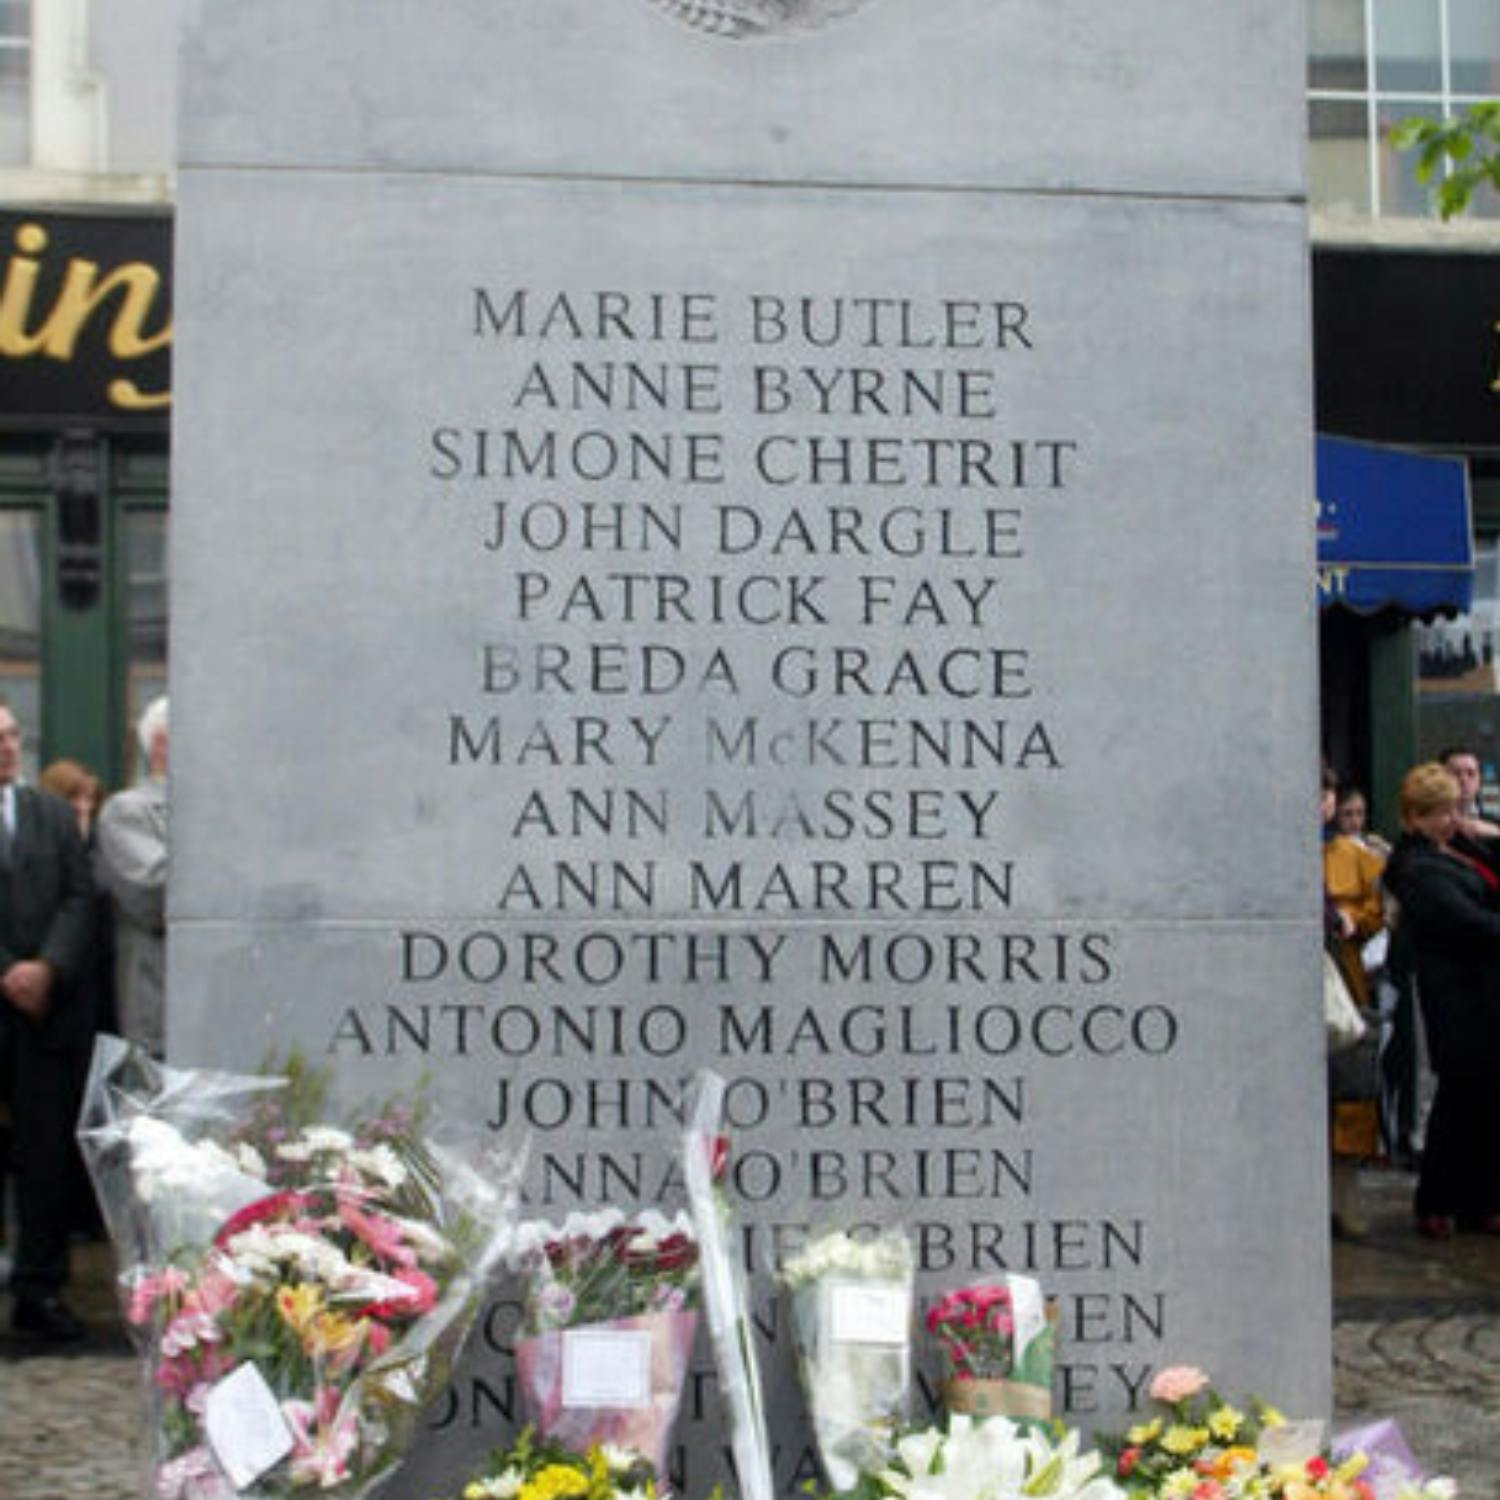 Bertie Ahern on the 50th anniversary of the Dublin-Monaghan bombings